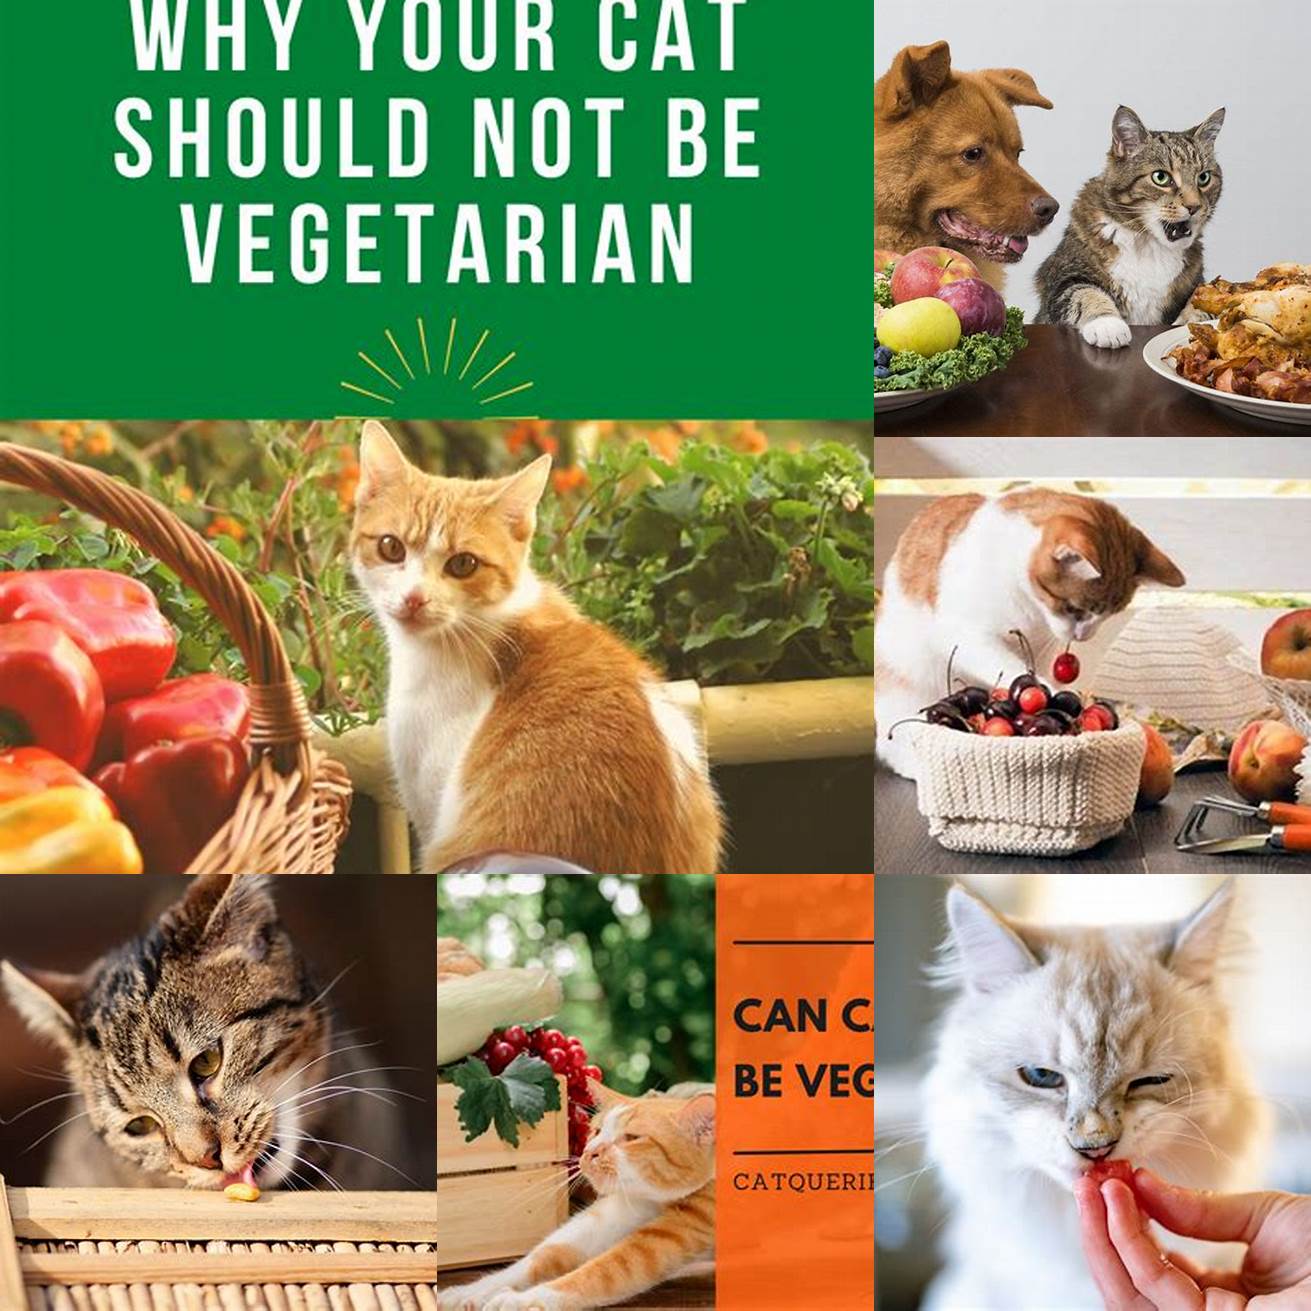 Q Can cats be vegetarian